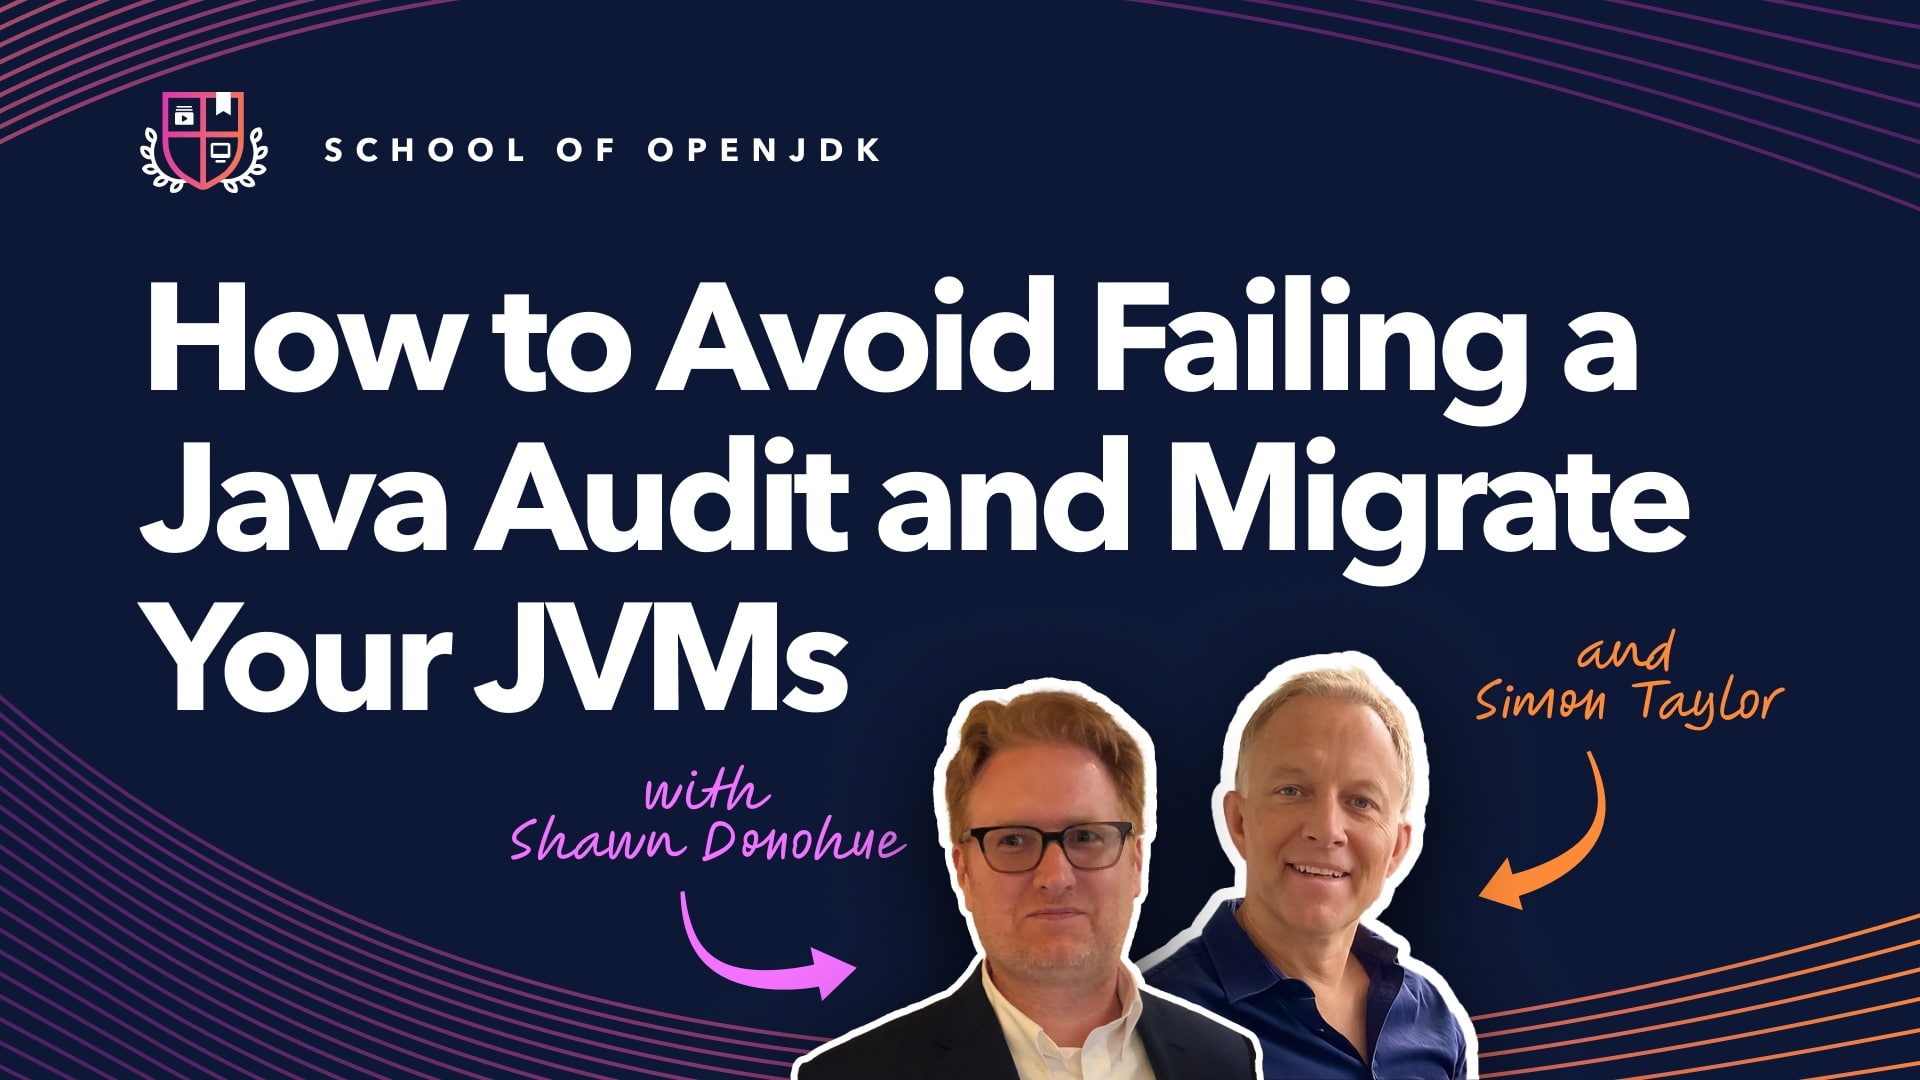 How to Avoid Failing a Java Audit and Migrate Your JVMs